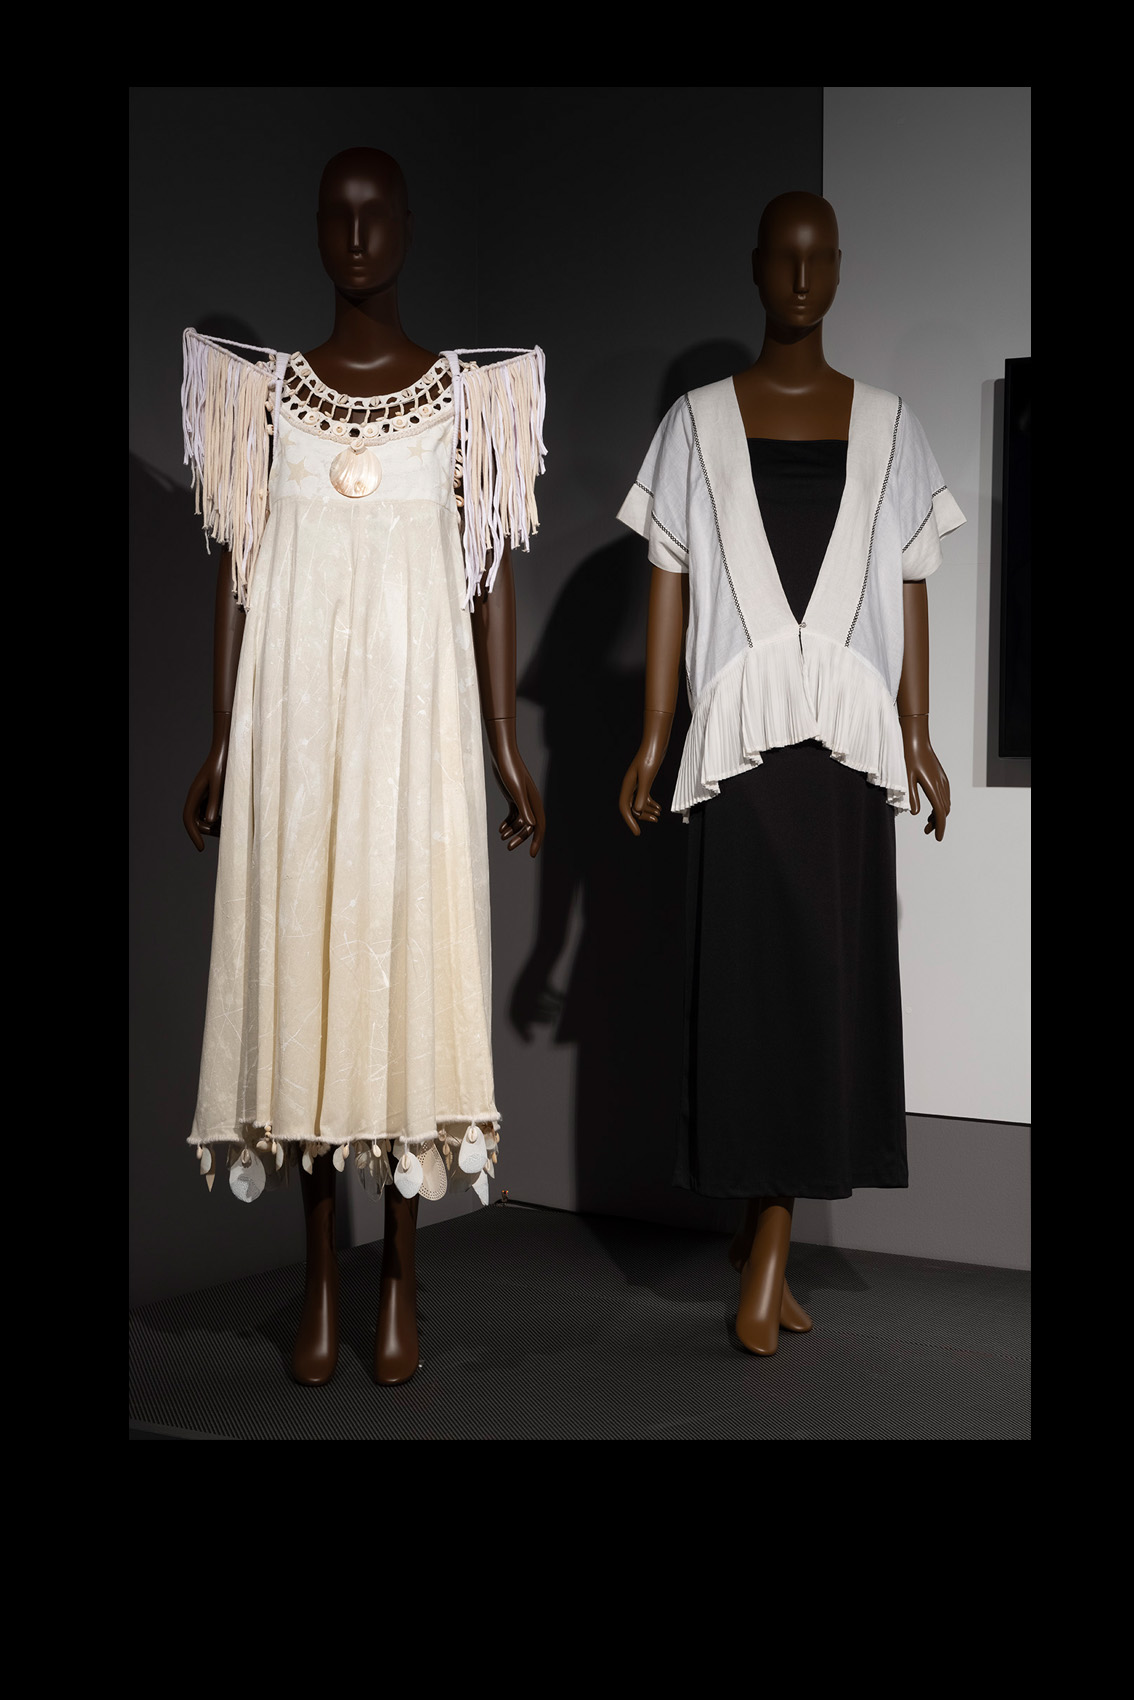 Moda Hoy installation of two dresses on mannequins, both with work by indigenous artisans